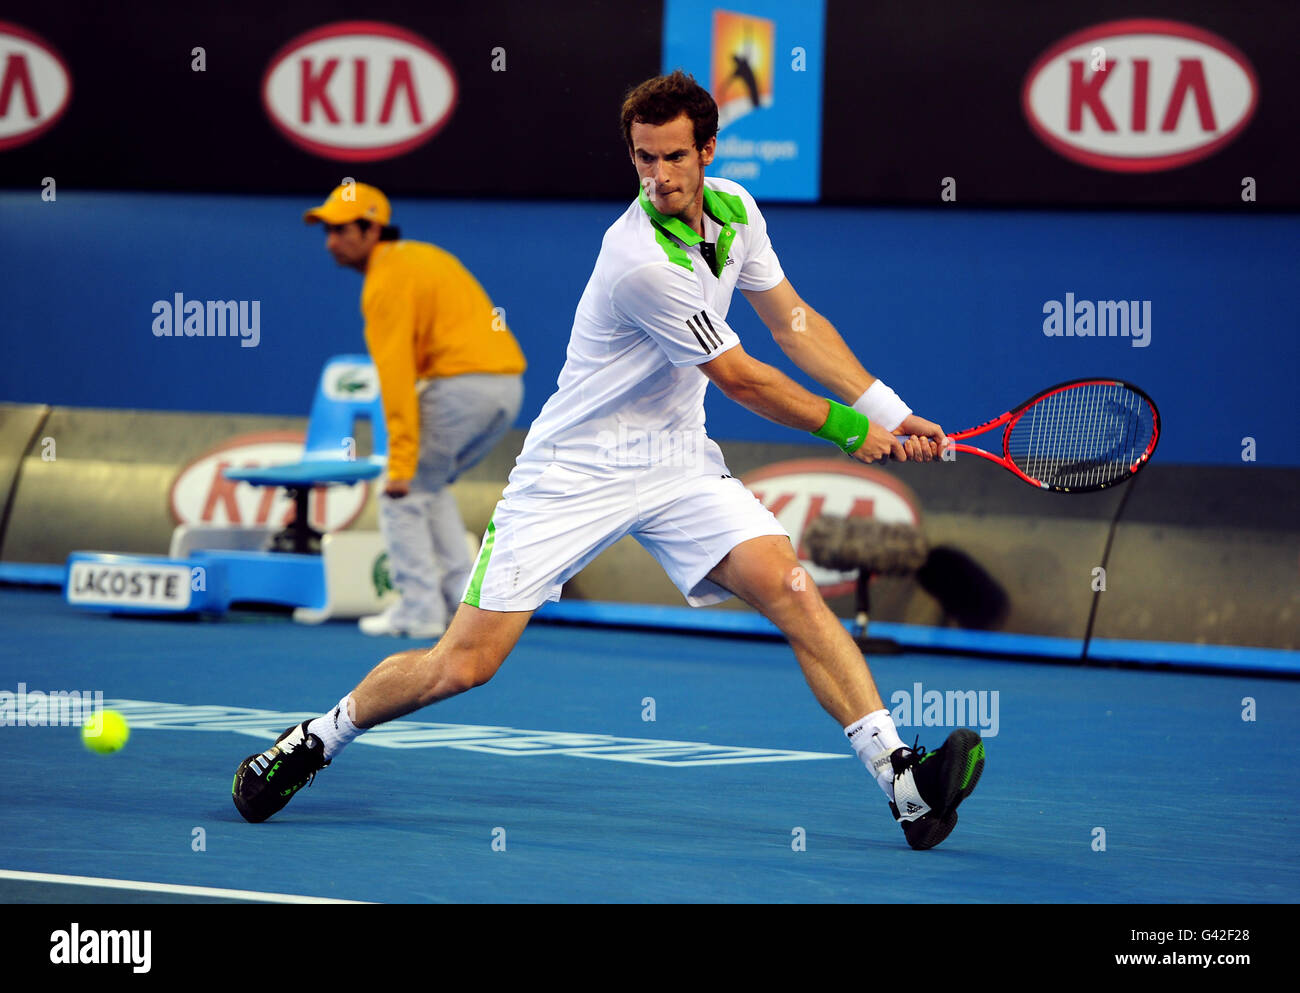 Tennis - 2011 Australian Open - Day Four - Park. Great Britain's Andy Murray in action against Ukraine's Illya Marchenko Stock Photo - Alamy